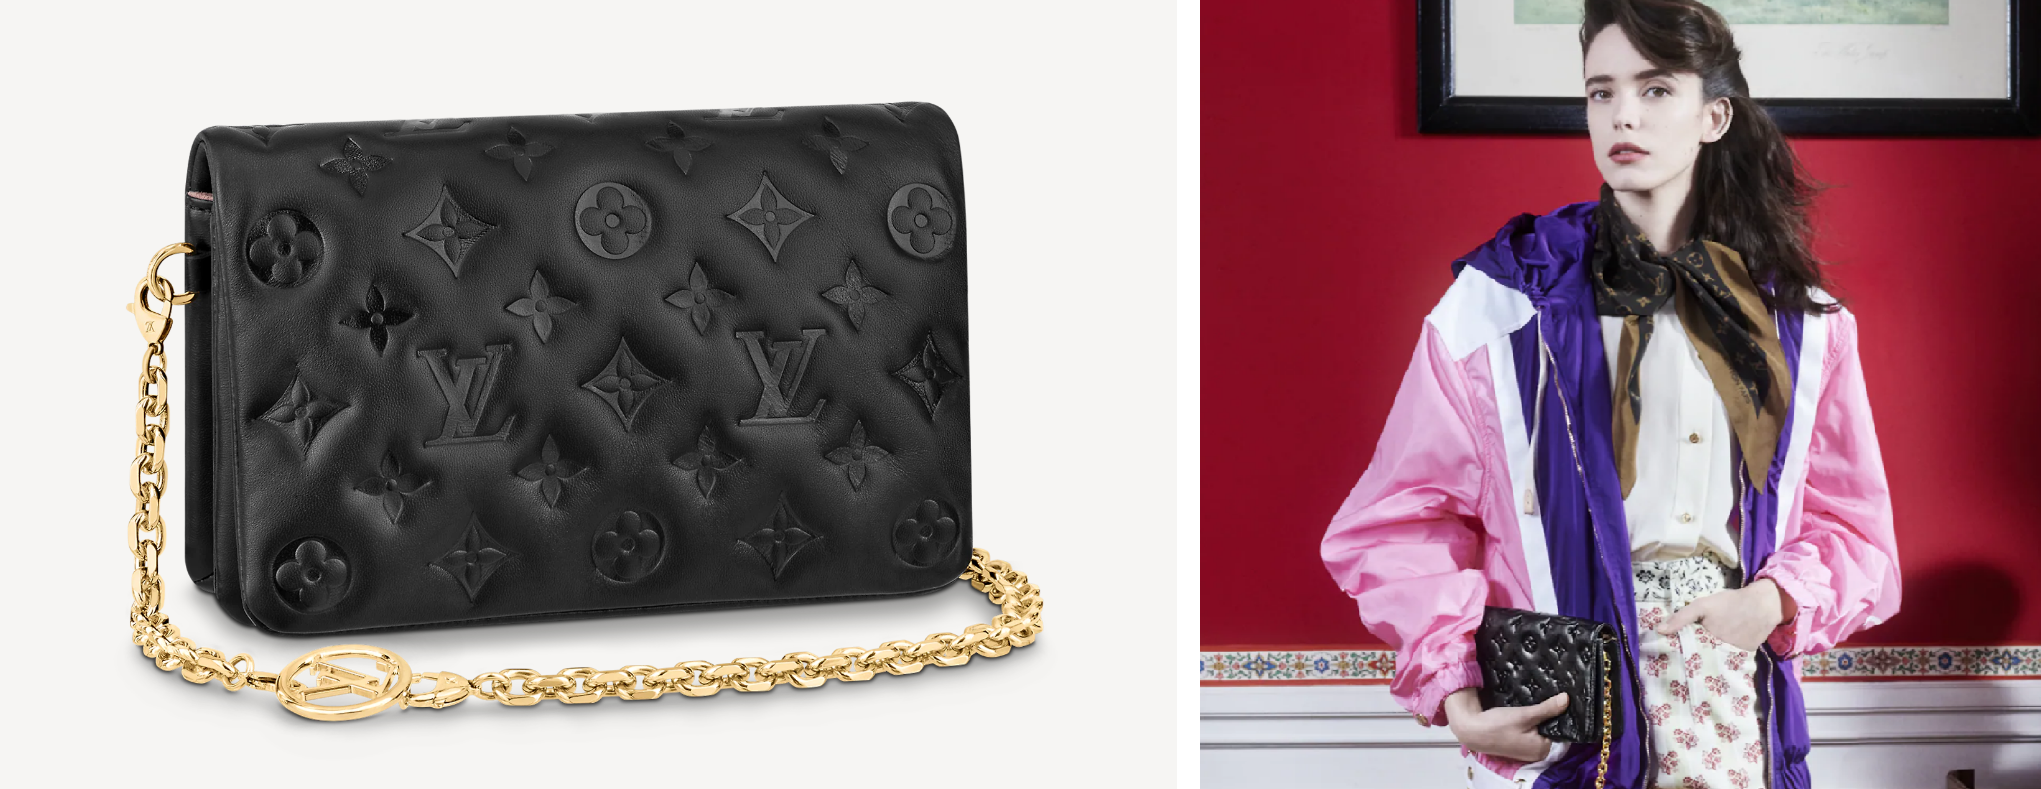 Louis Vuitton Capucines Dupe Bags from $50